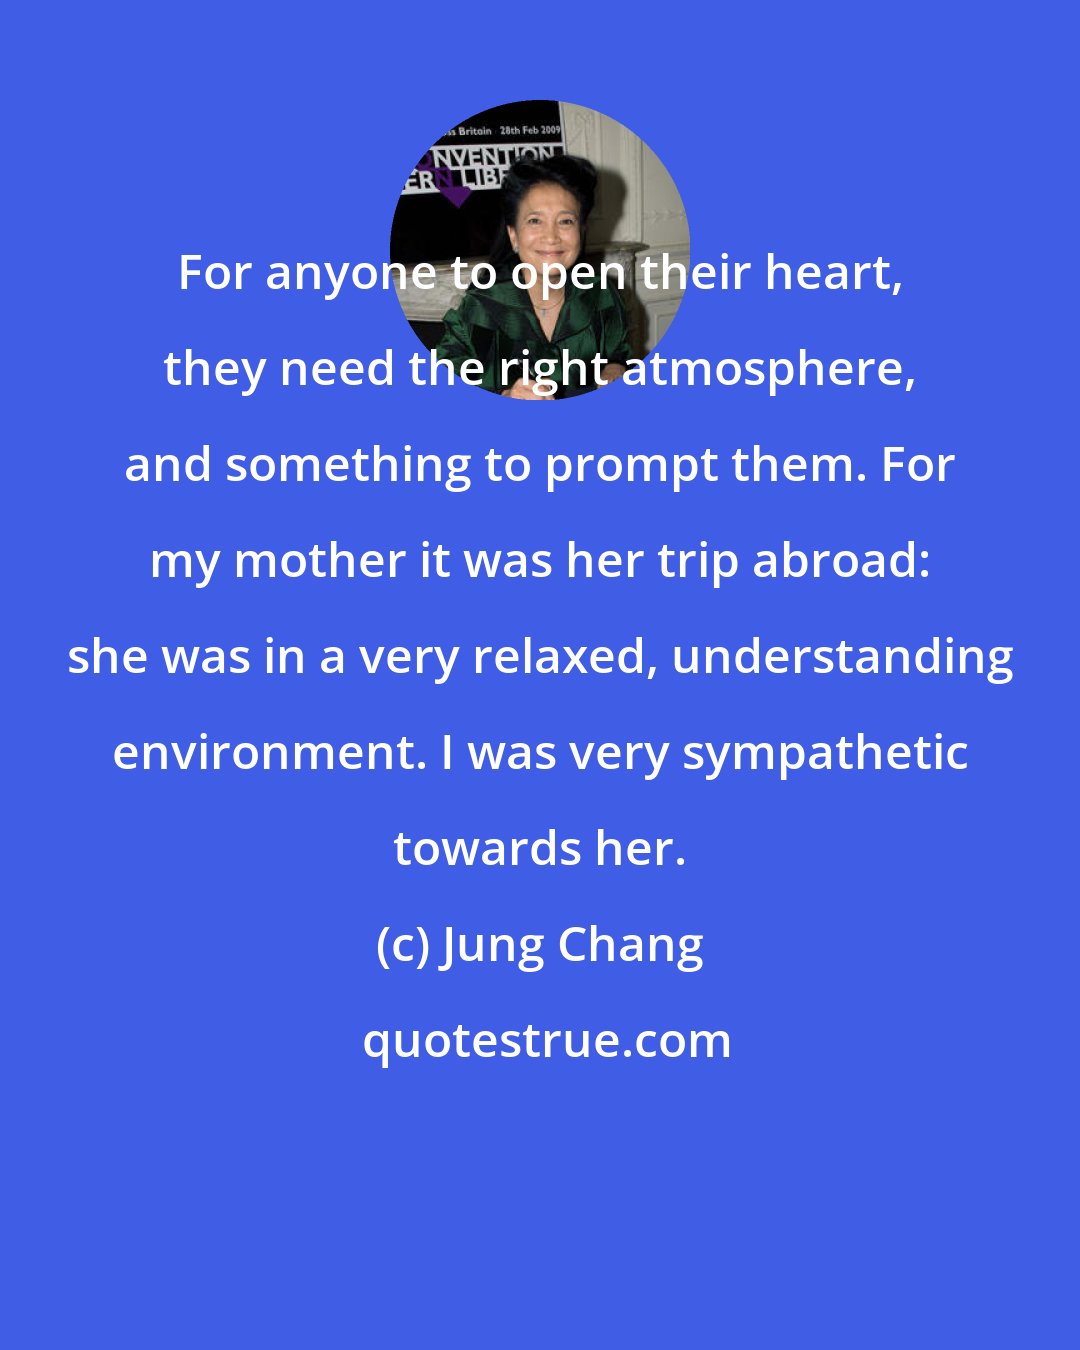 Jung Chang: For anyone to open their heart, they need the right atmosphere, and something to prompt them. For my mother it was her trip abroad: she was in a very relaxed, understanding environment. I was very sympathetic towards her.